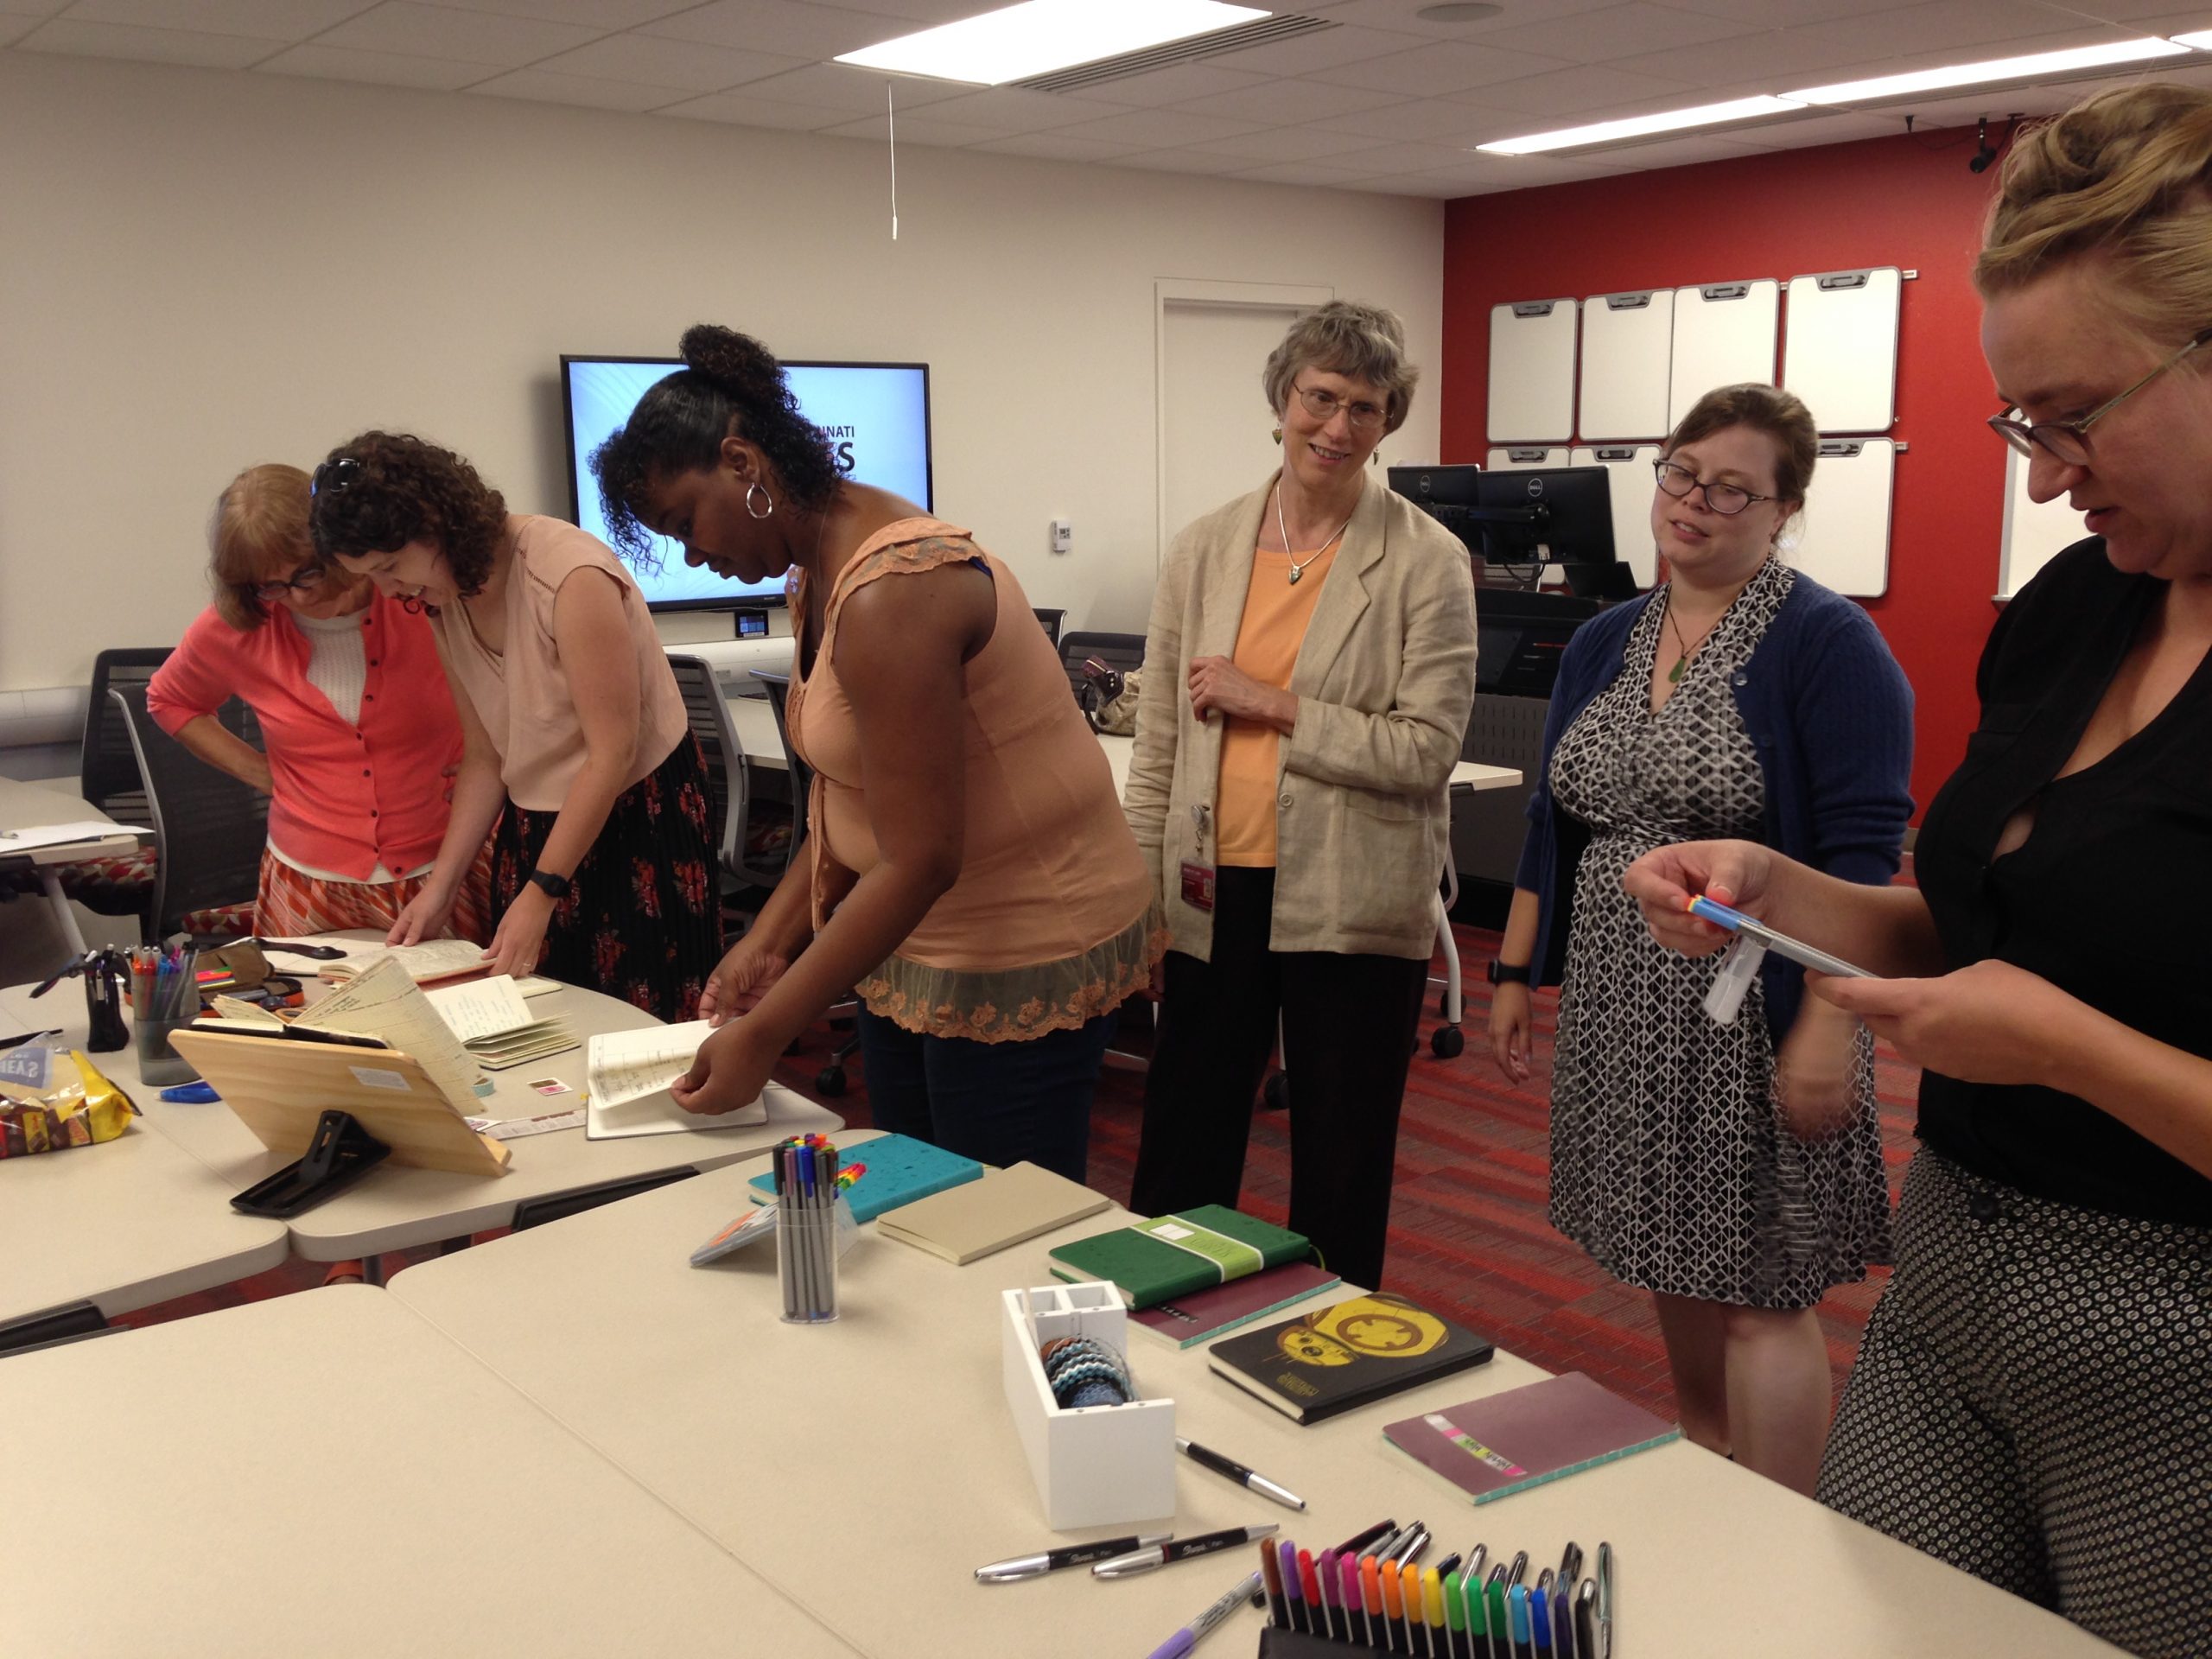 Workshop participants examining bullet journal supplies on table